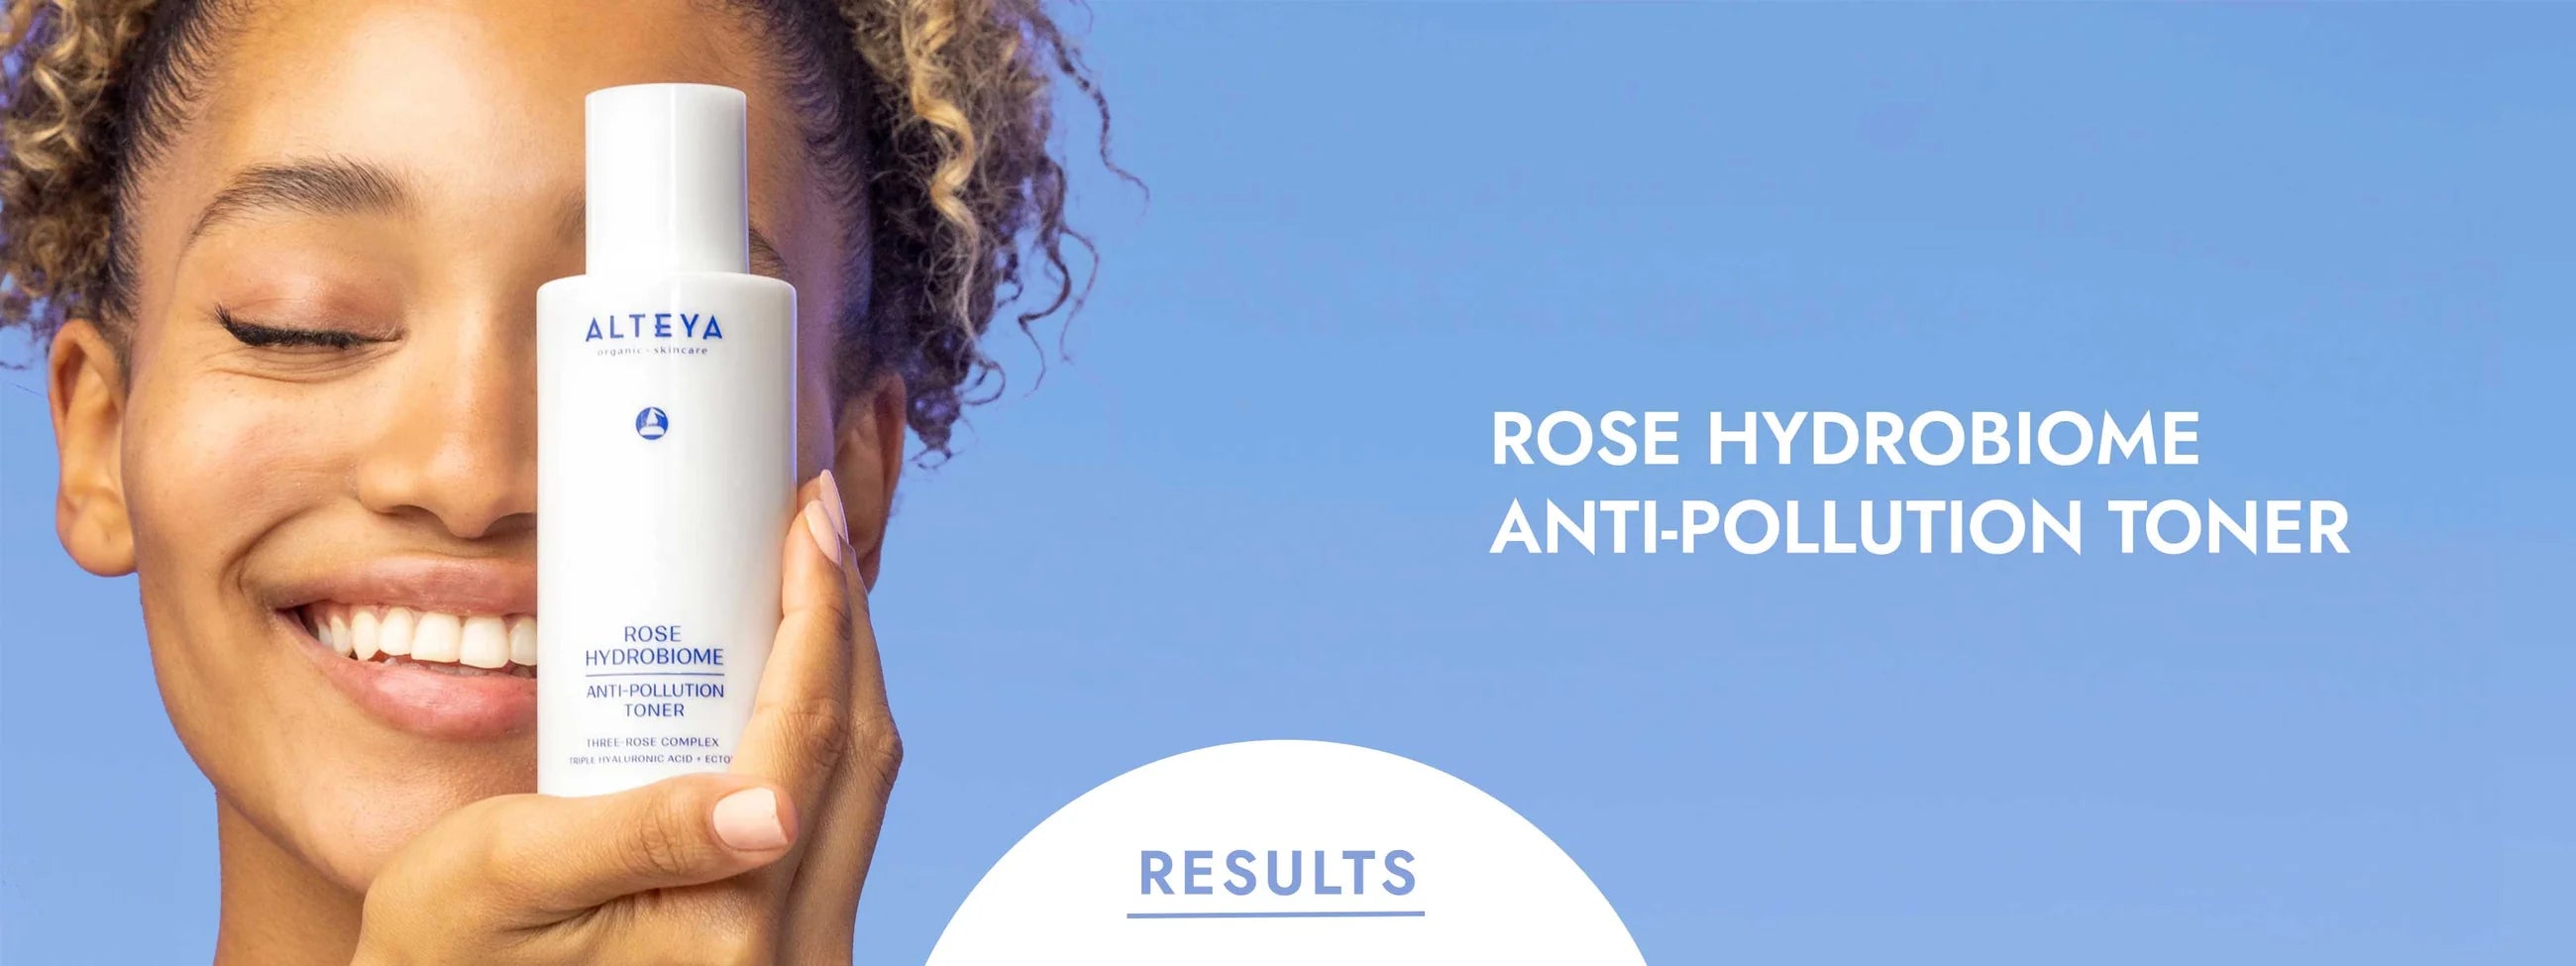 A woman is holding a bottle of rose hydrosoma anti-pollution toner.